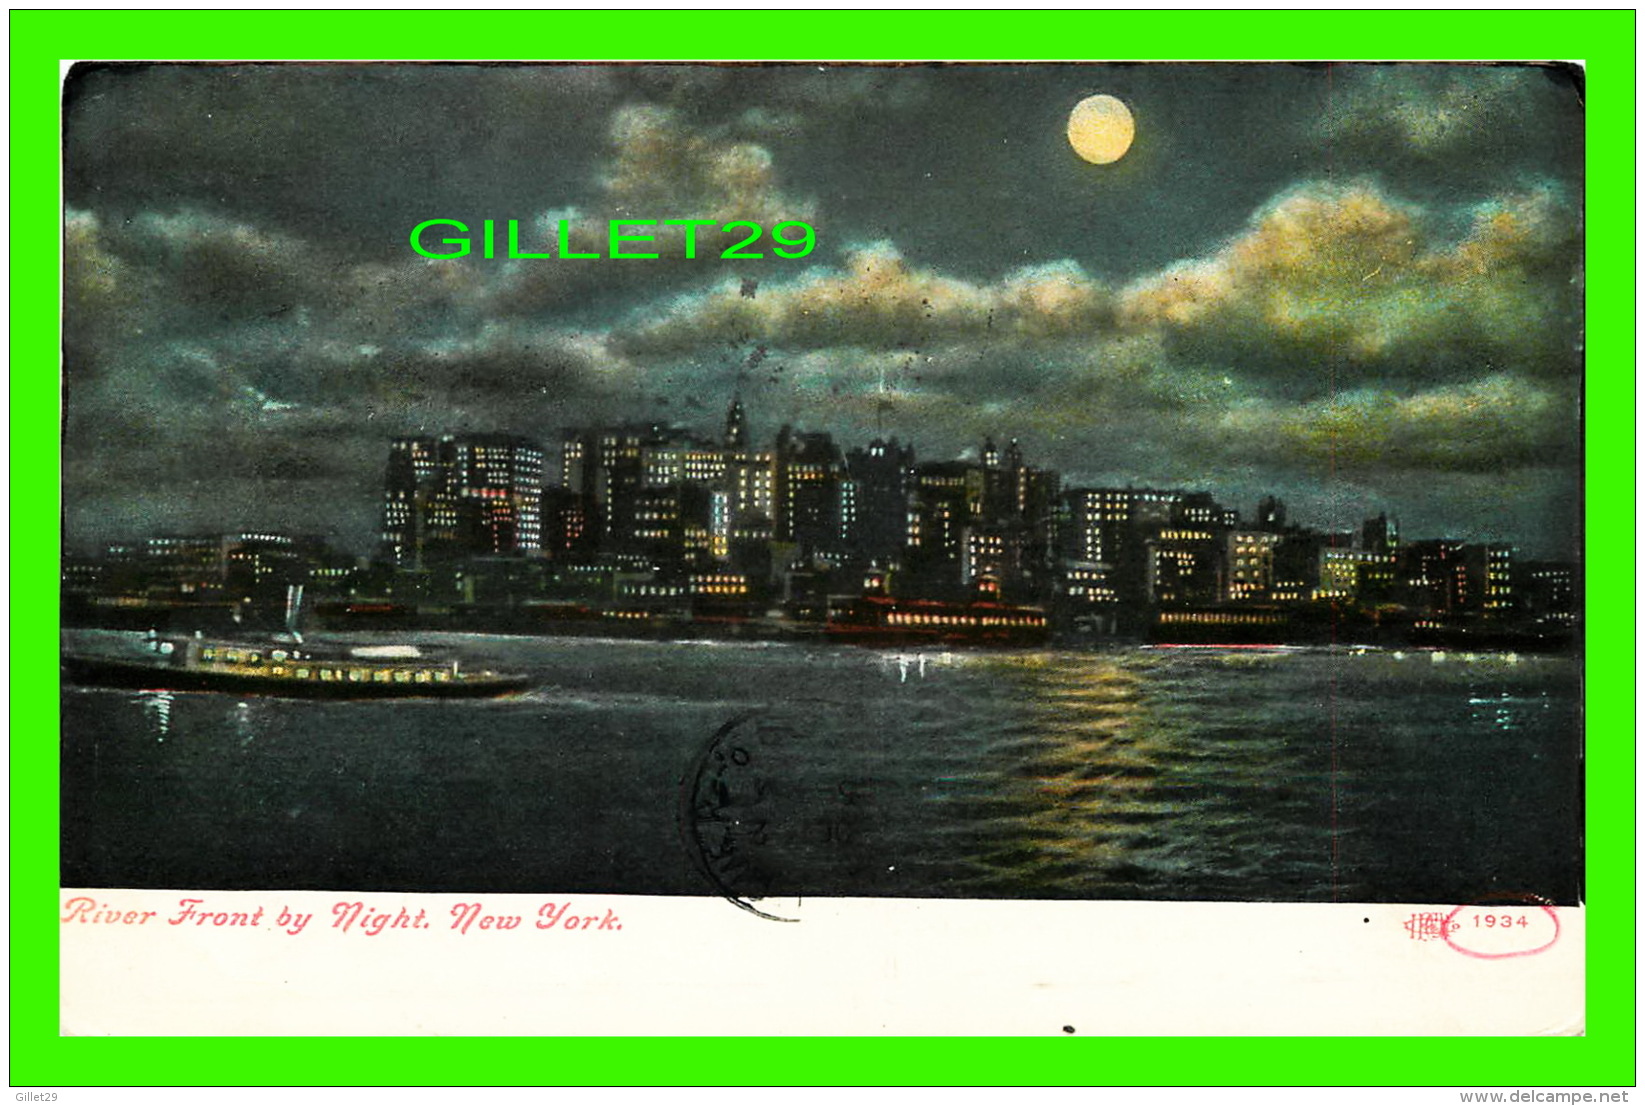 NEW YORK CITY, NY - RIVER FRONT BY NIGHT - TRAVEL IN 1909 - - Hudson River